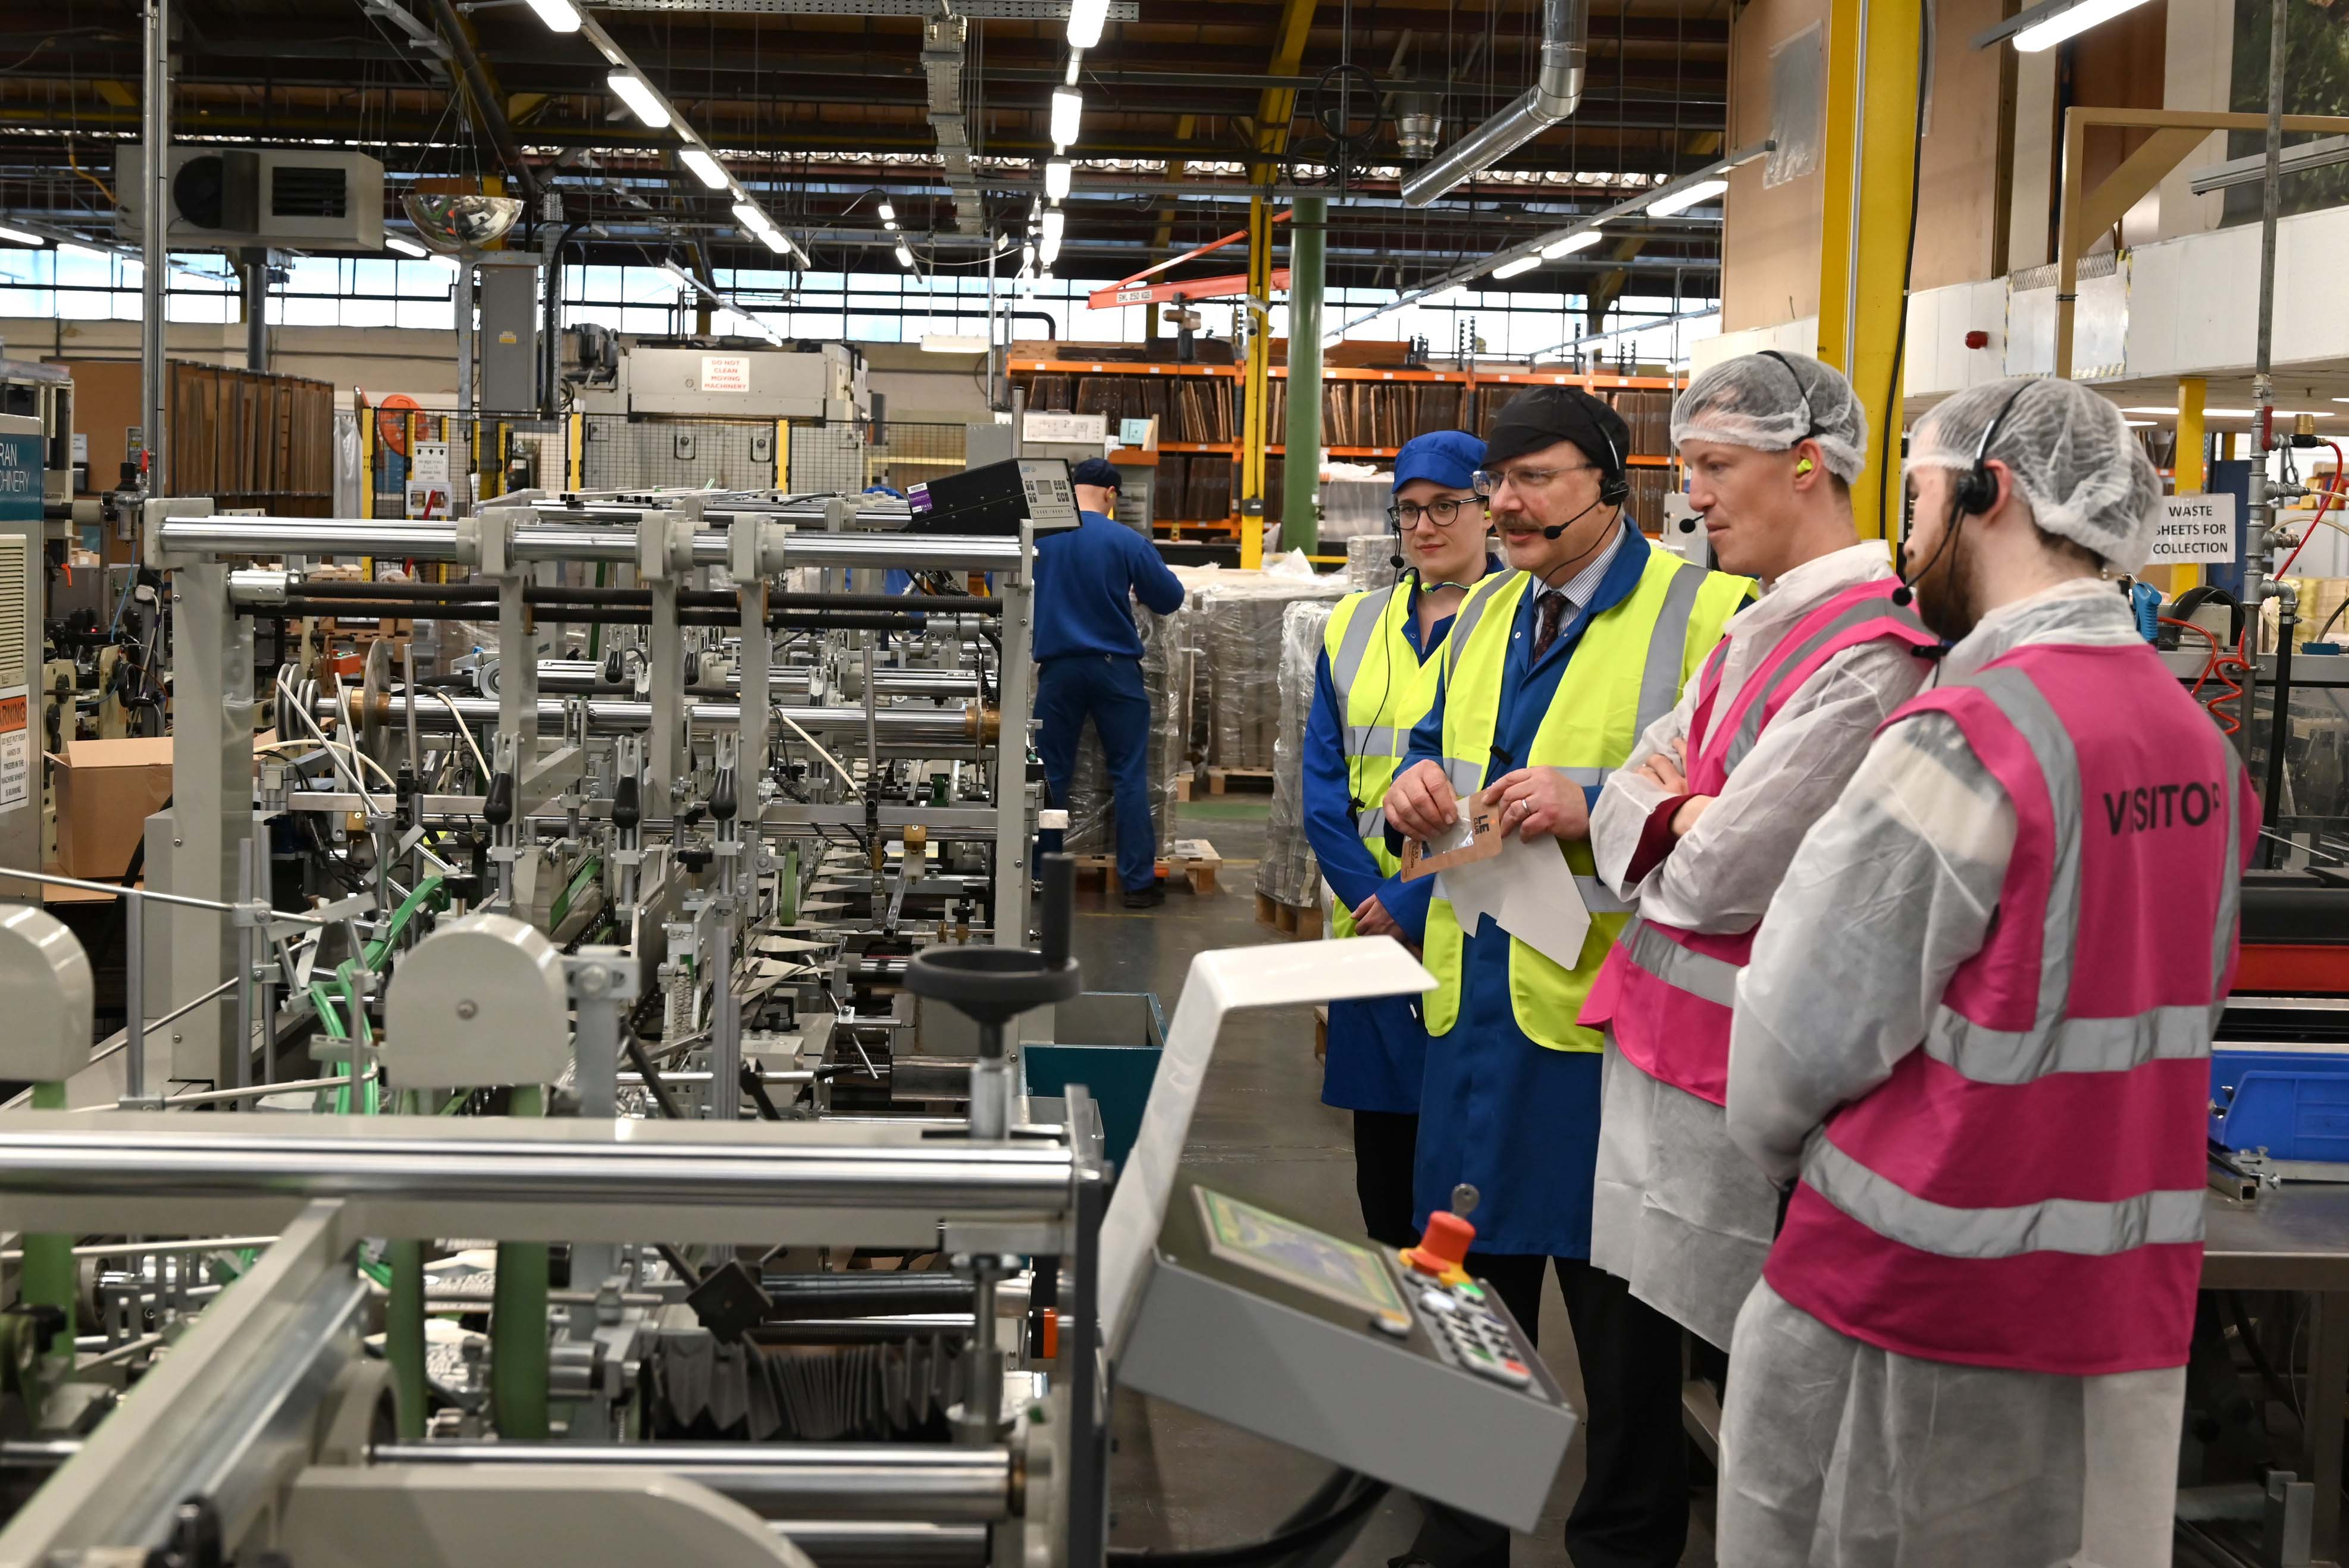 “FANTASTIC PACKAGING PLANT” – NEW MP ENJOYS VISIT TO COLPAC